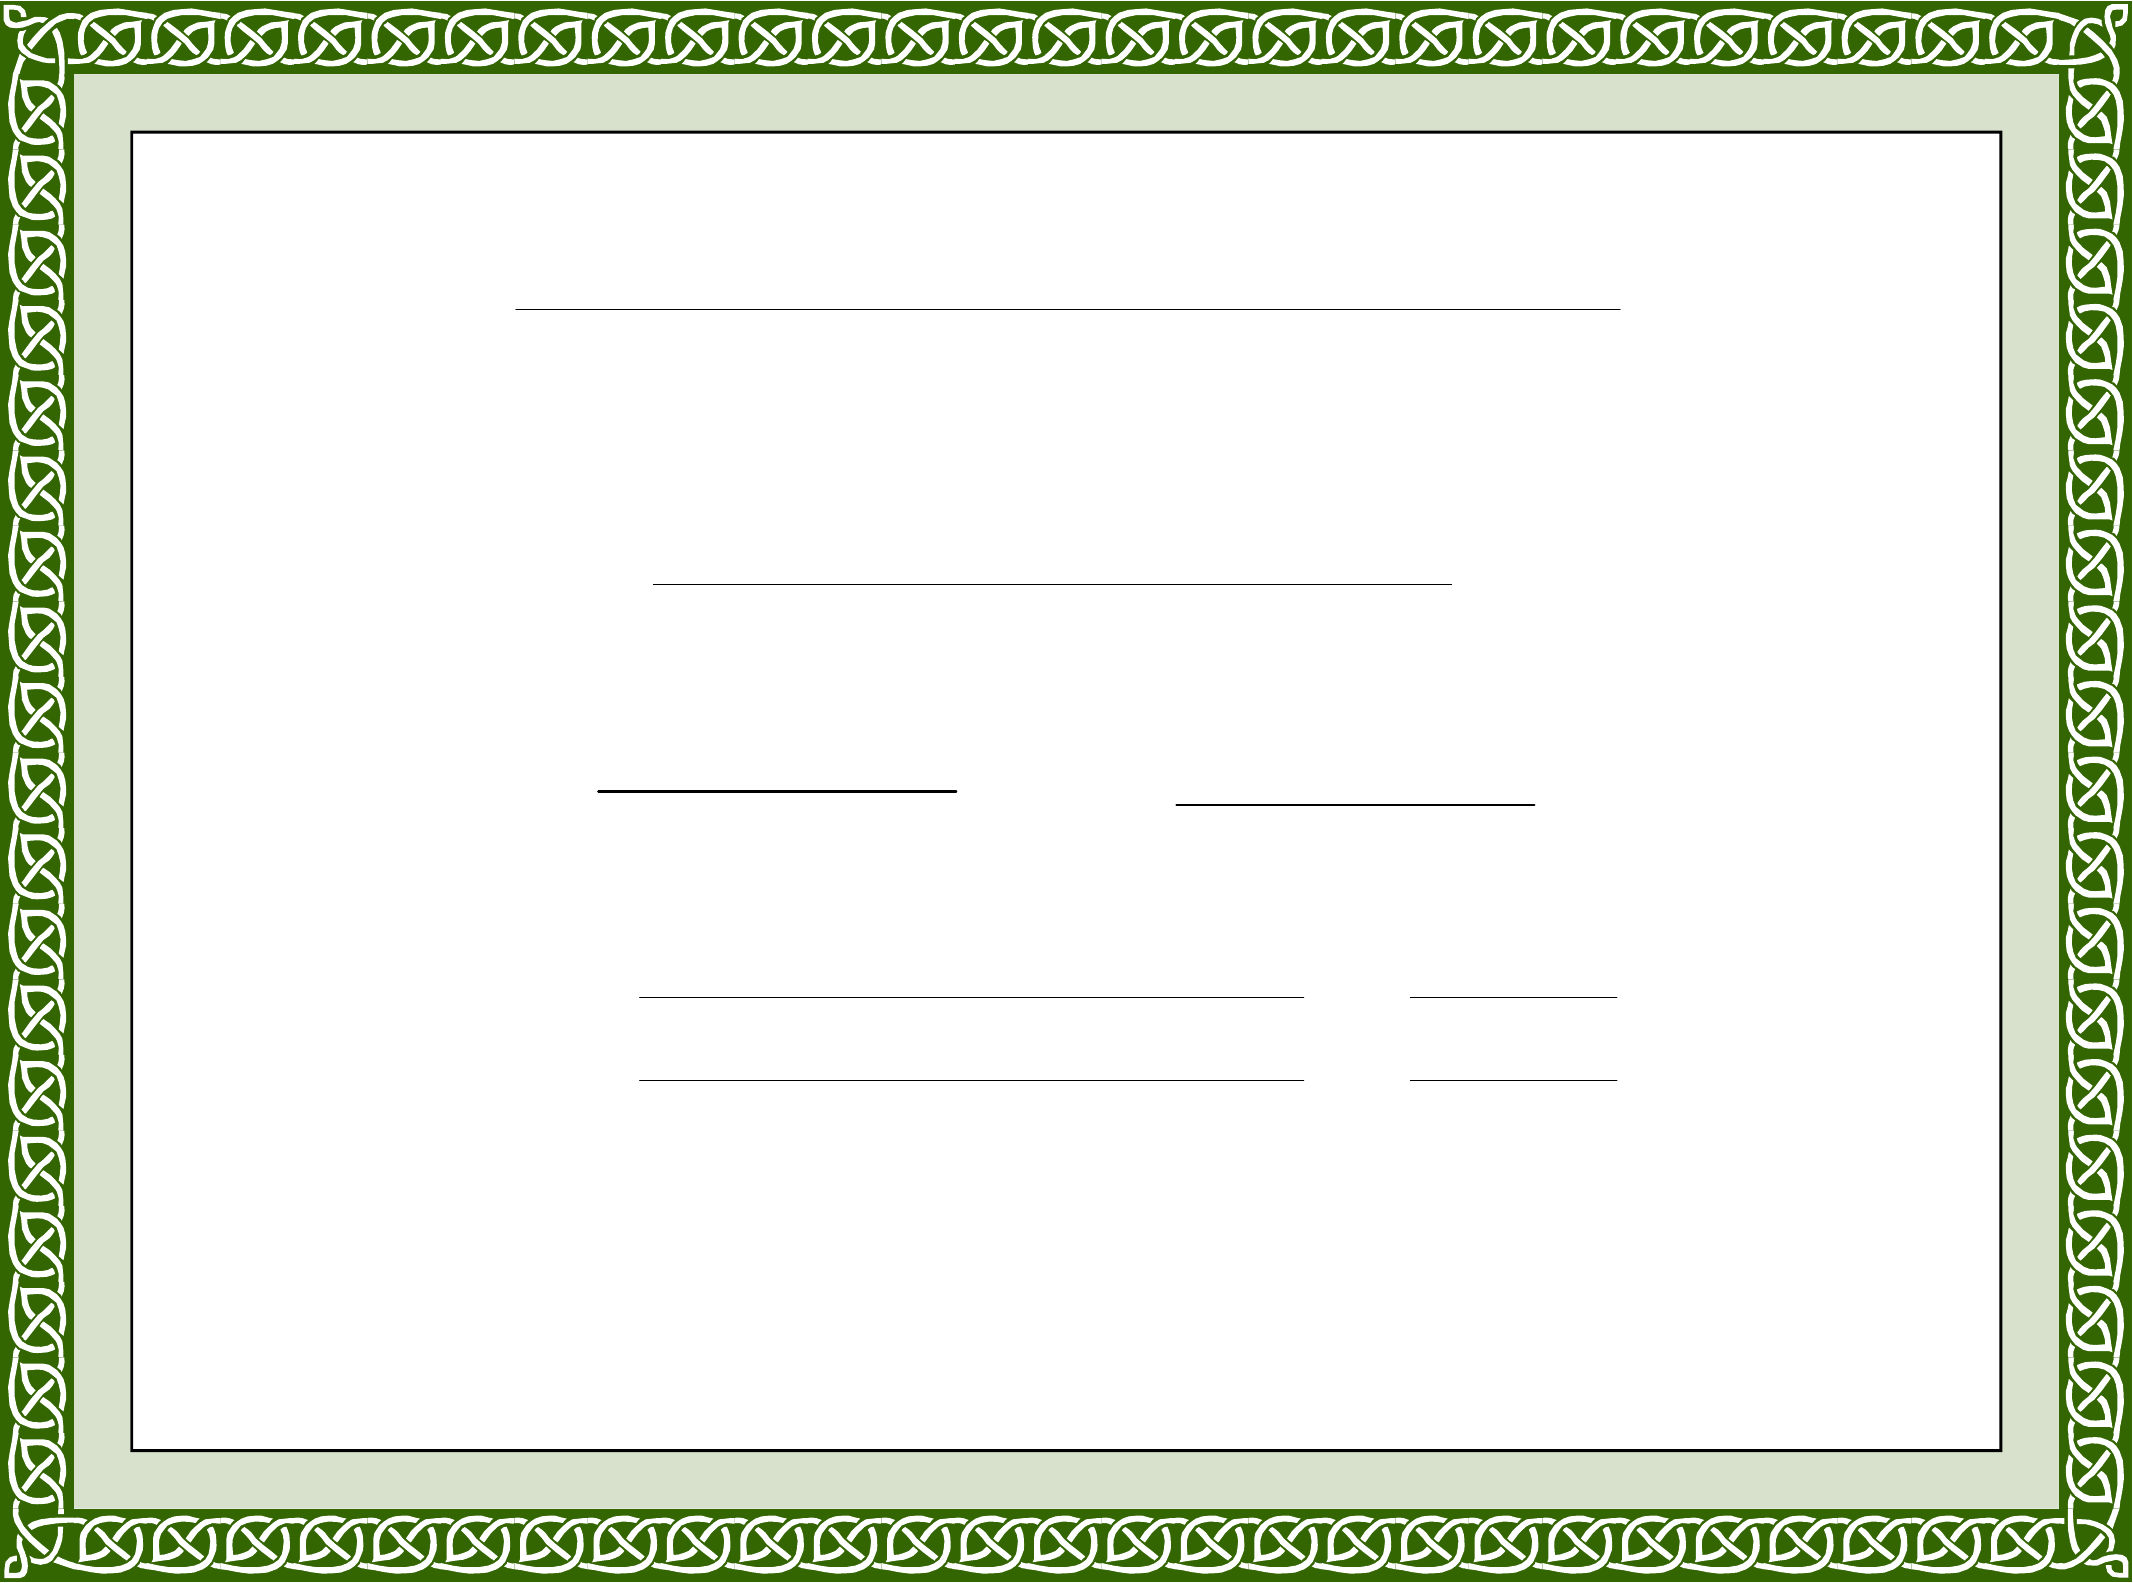 Sample Training Completion Certificate Template Free Download Within Blank Certificate Templates Free Download